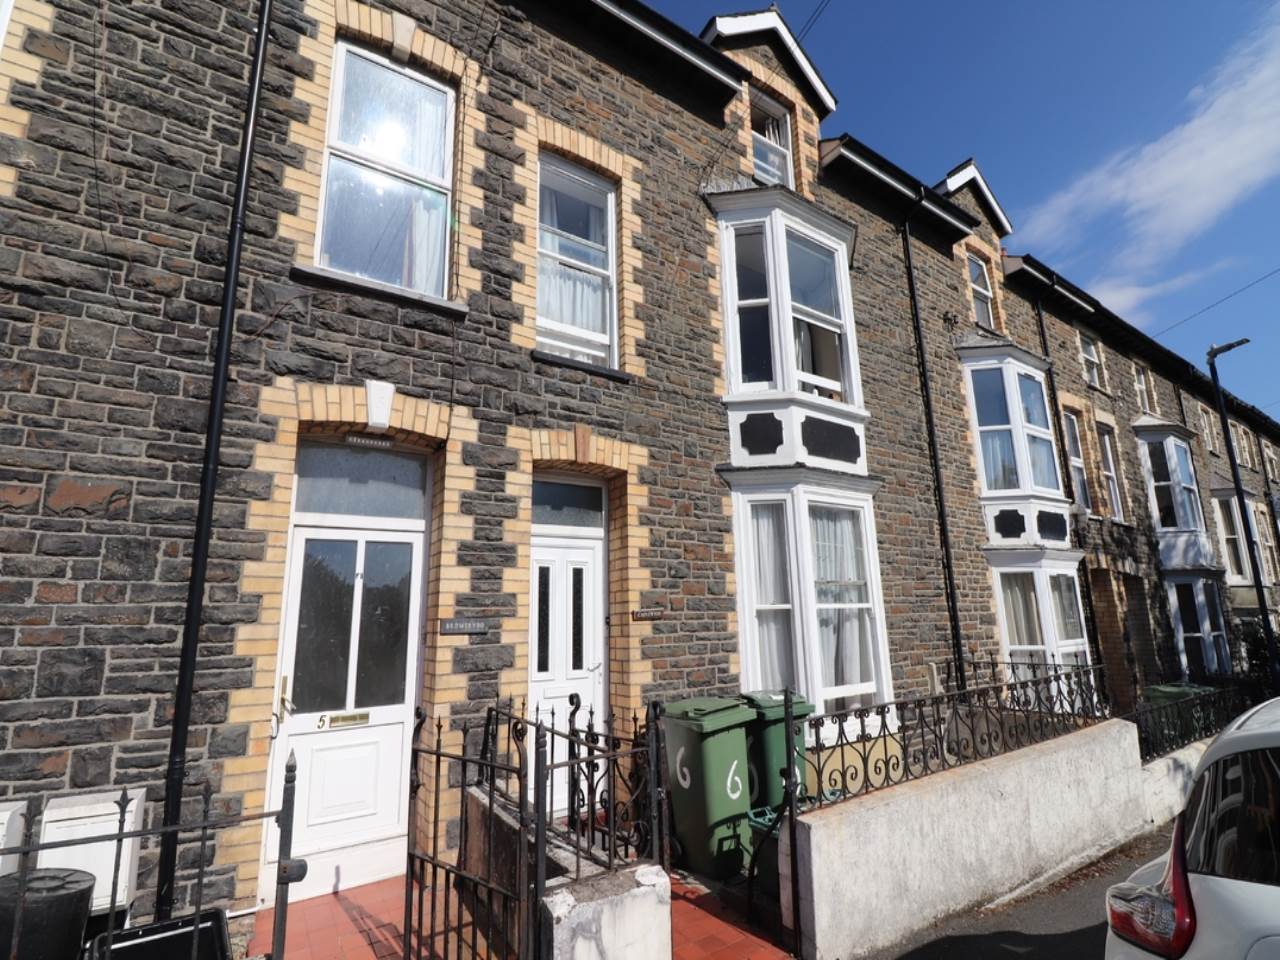 7 bed terraced house for sale in 6 Cae'r-gog Terrace, Aberystwyth, SY23